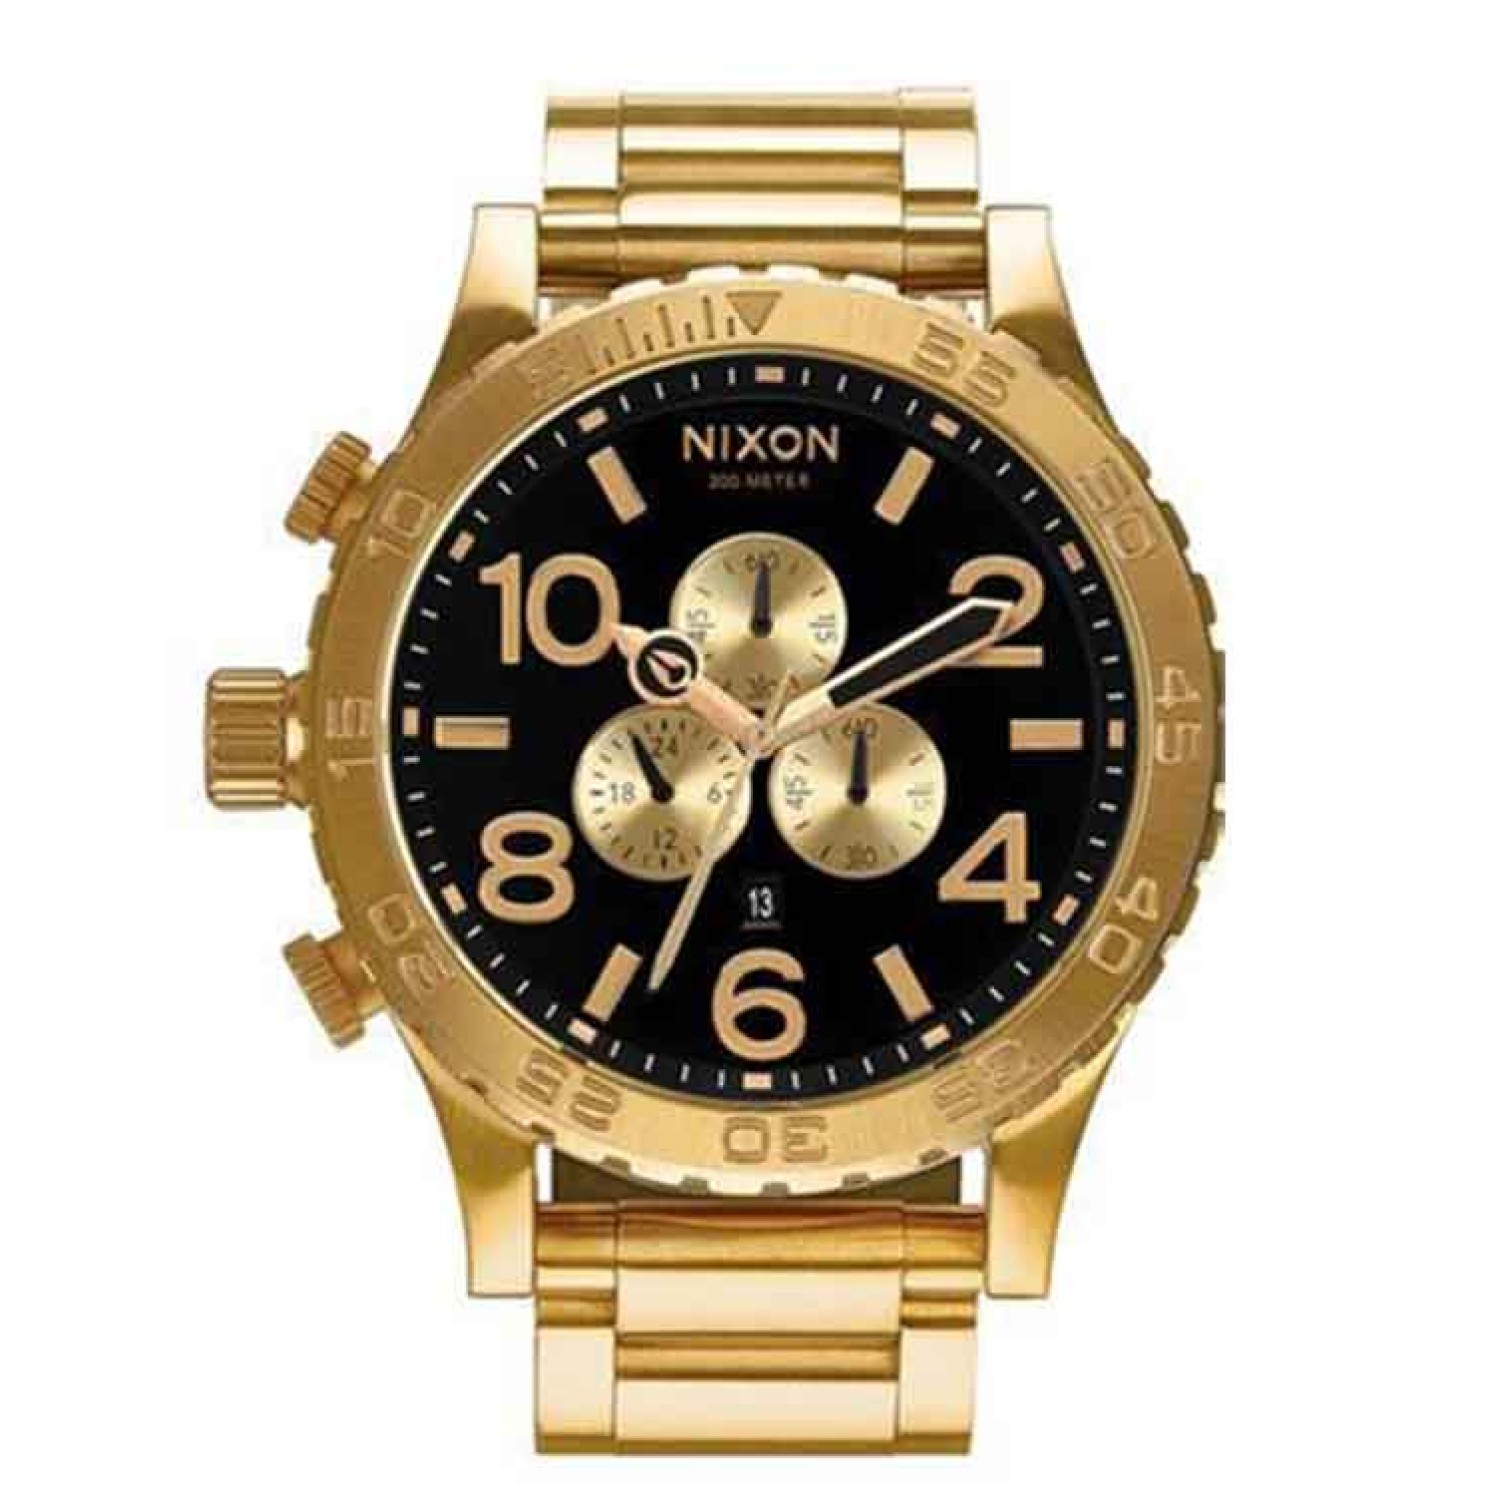 A083510 NIXON Gold Chronograph Watch. Handsome, easy-to-read 51 mm design that launched the oversized trend, with 3 CD textured sub dials 2 Year  Guarantee 3 Months No Payments and Interest for Q Card holders This watch is pressure rated at 300 metres @ch